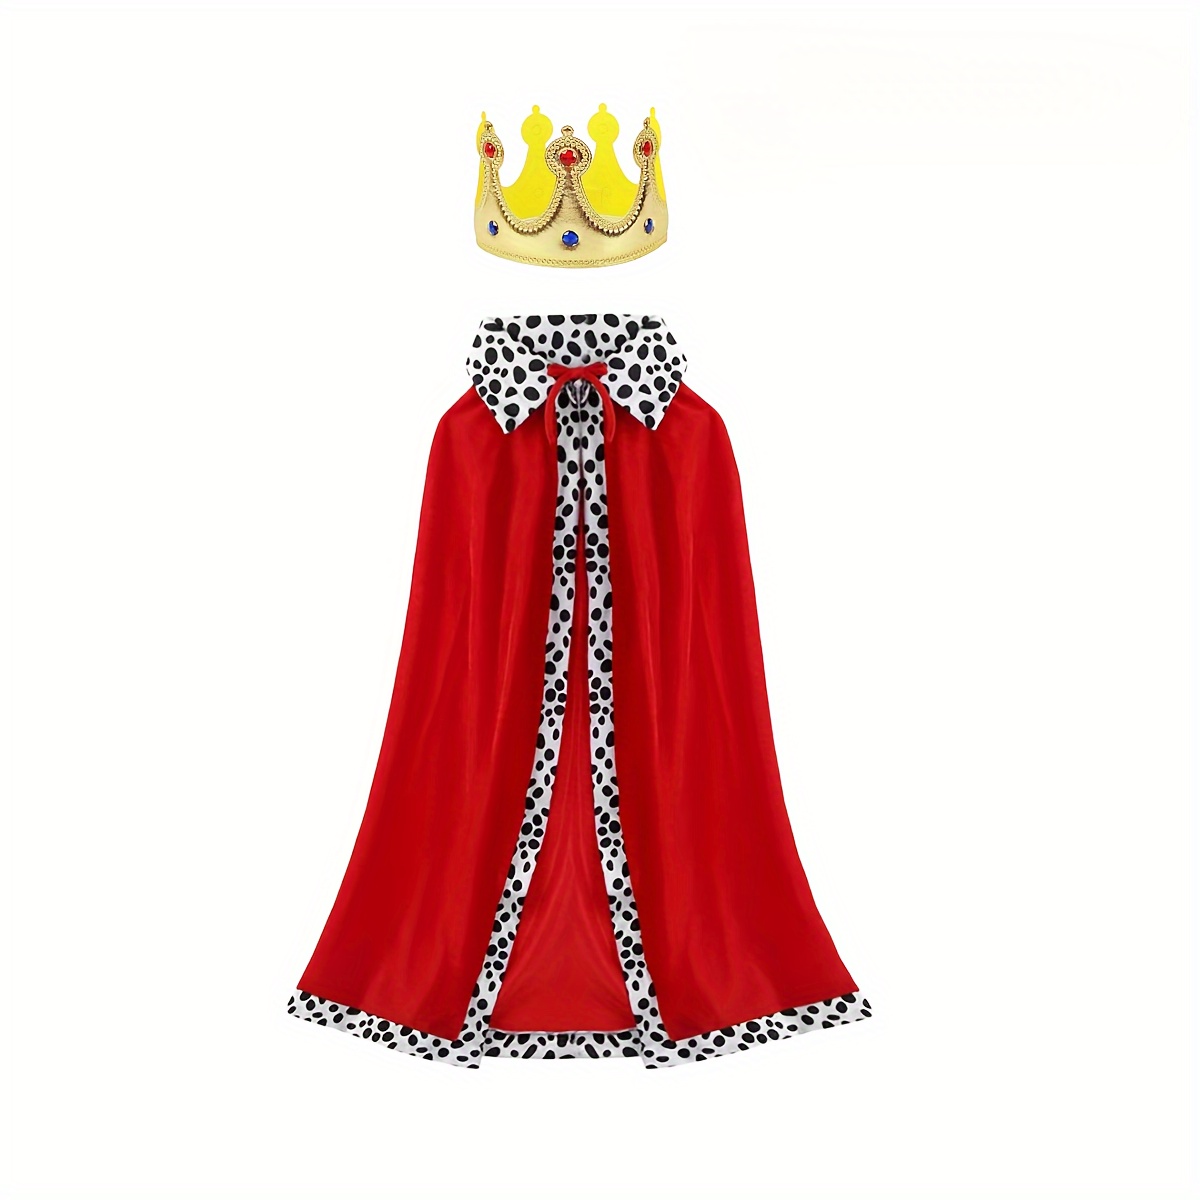 Queen of Hearts Adult and Child Costume Hat